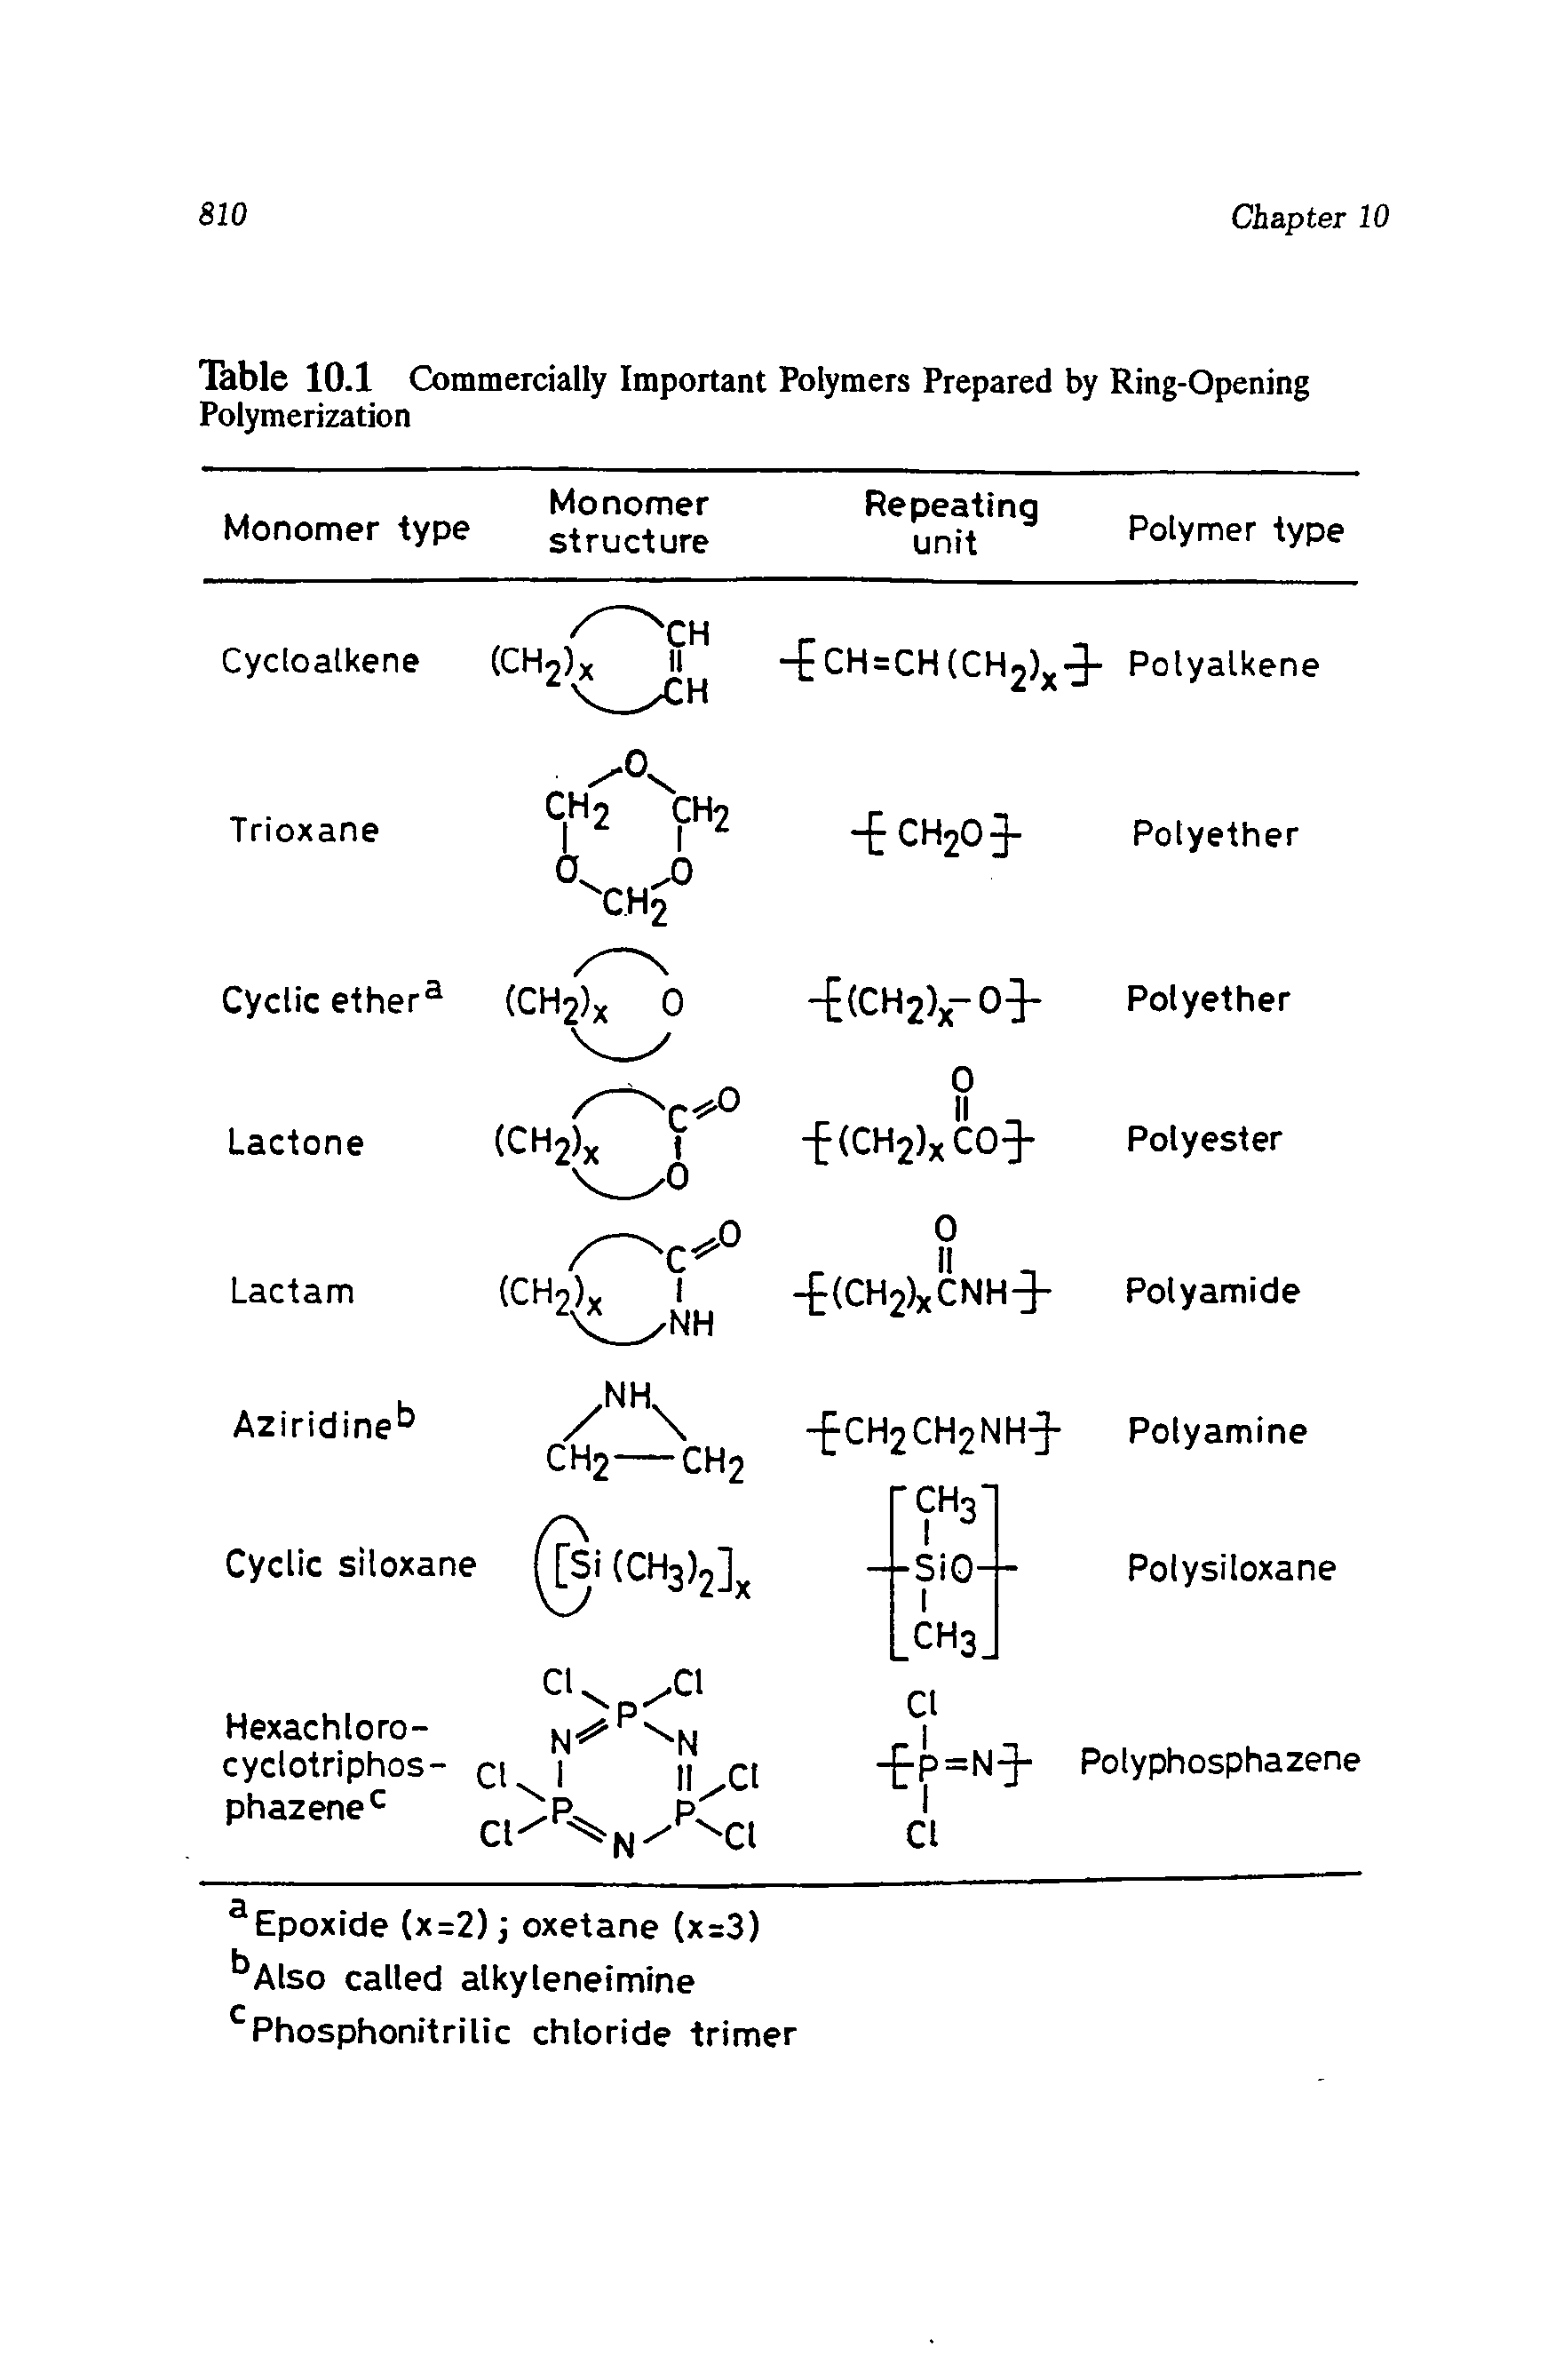 Table 10.1 Commercially Important Polymers Prepared by Ring-Opening Polymerization...